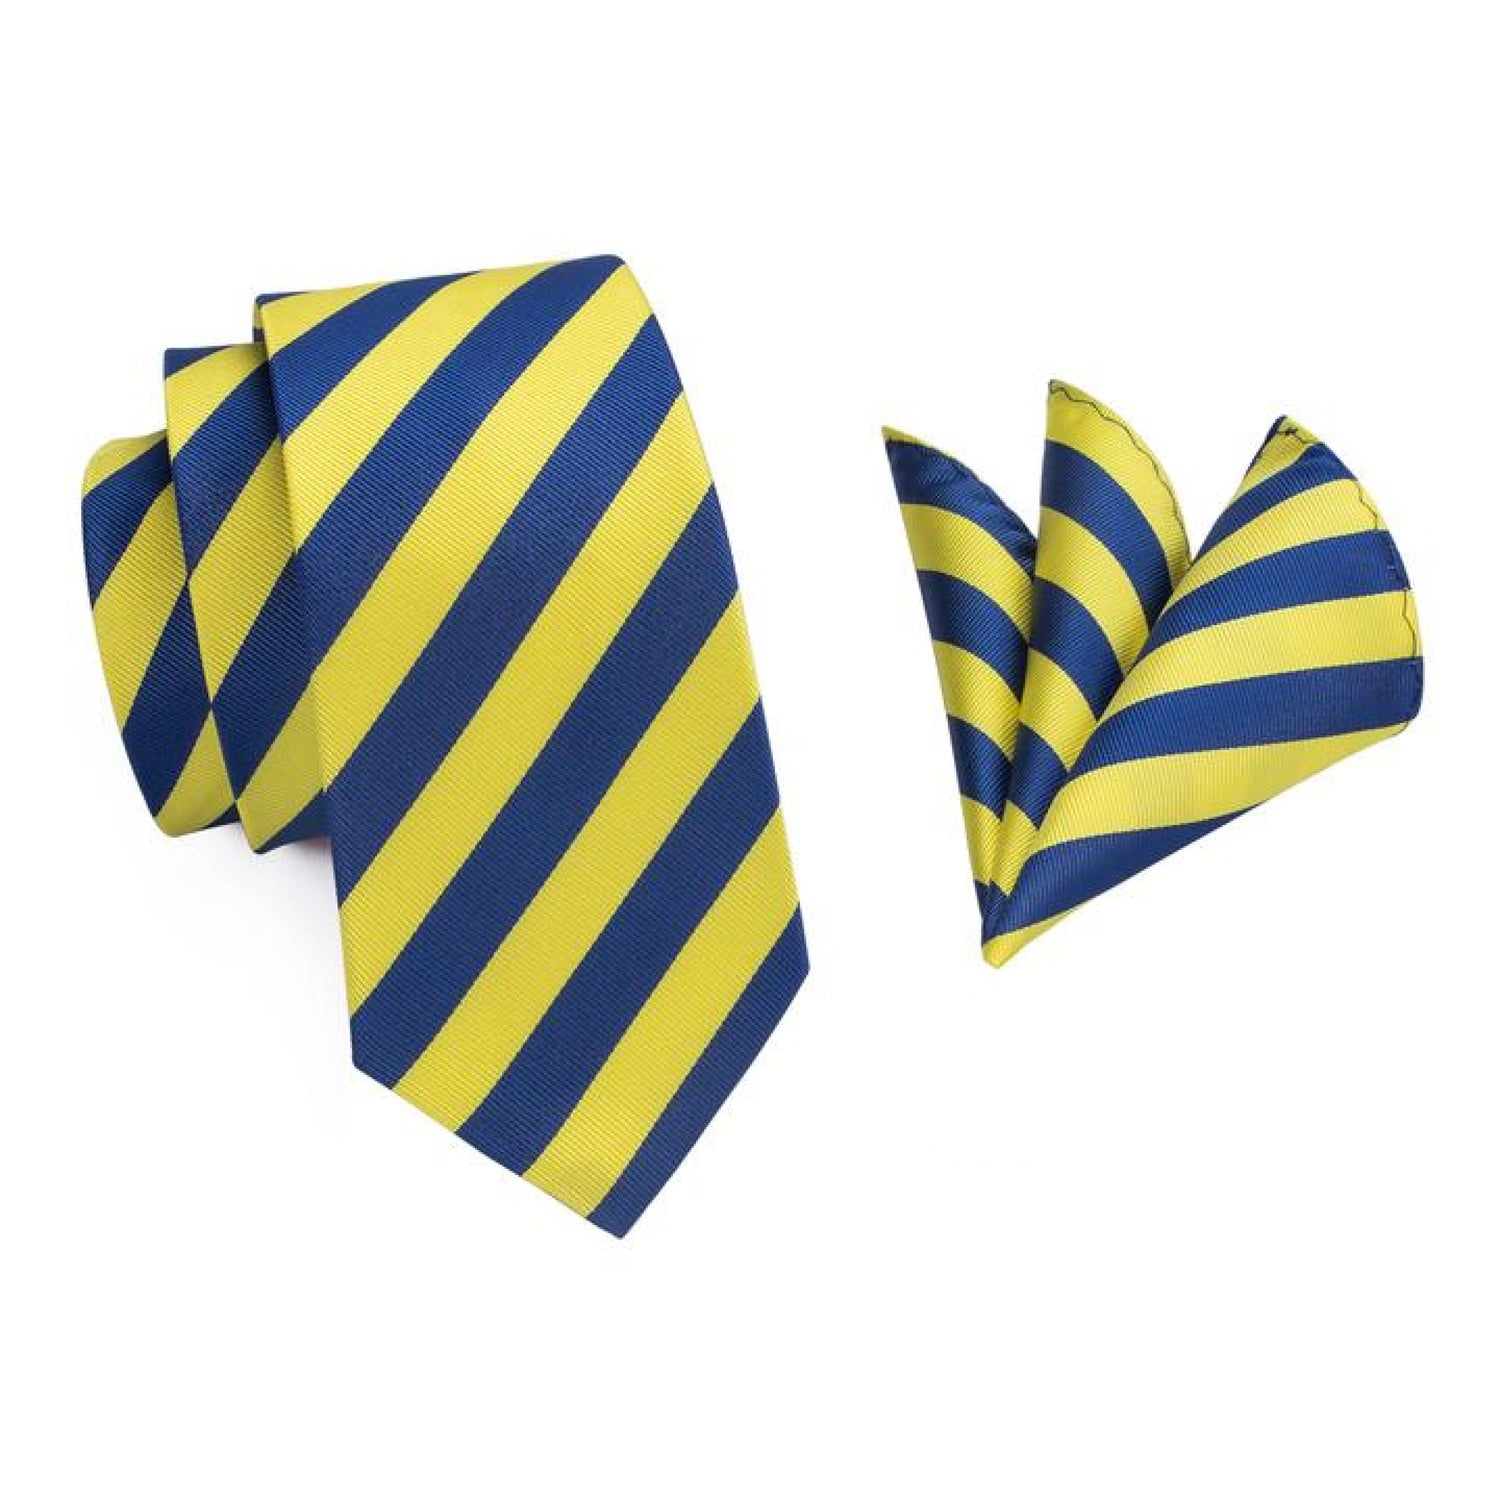 Alt view: Yellow and Blue Stripe Tie and Pocket Square